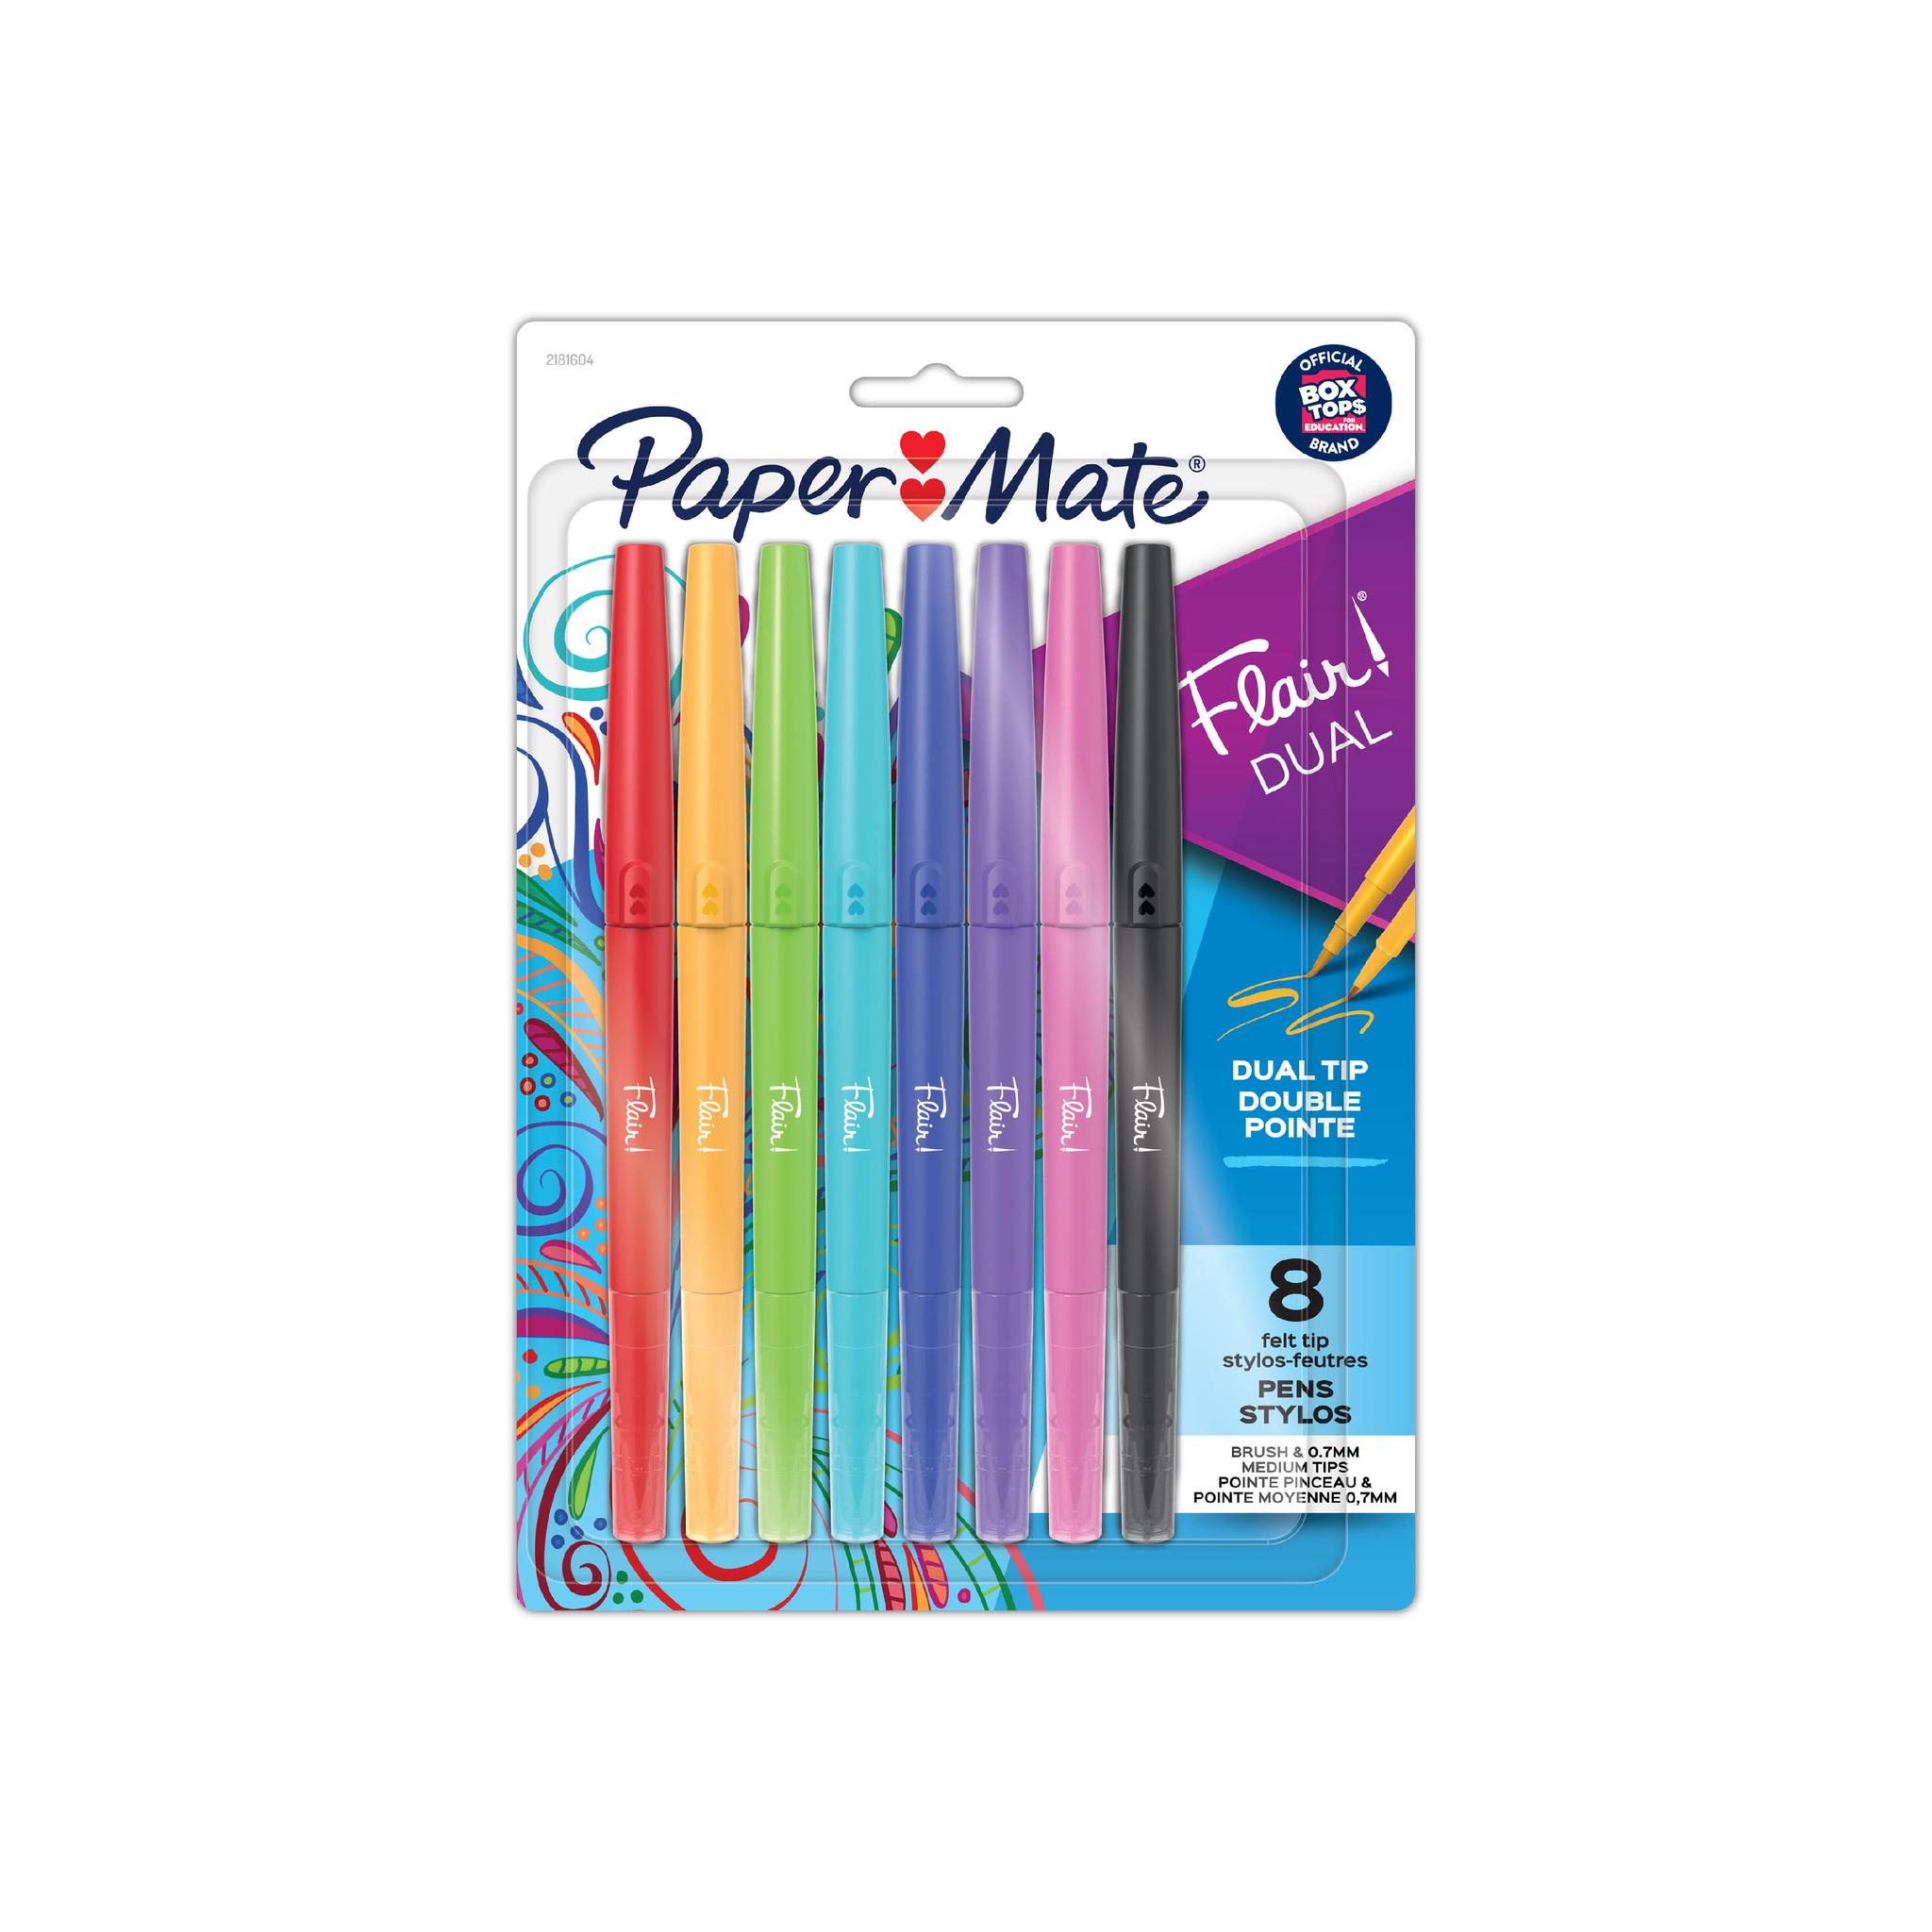 MARCADOR PAPER MATE FLAIR DUO FINO/BRUSH BLISTER X 8 COLORES SURT (2181387)